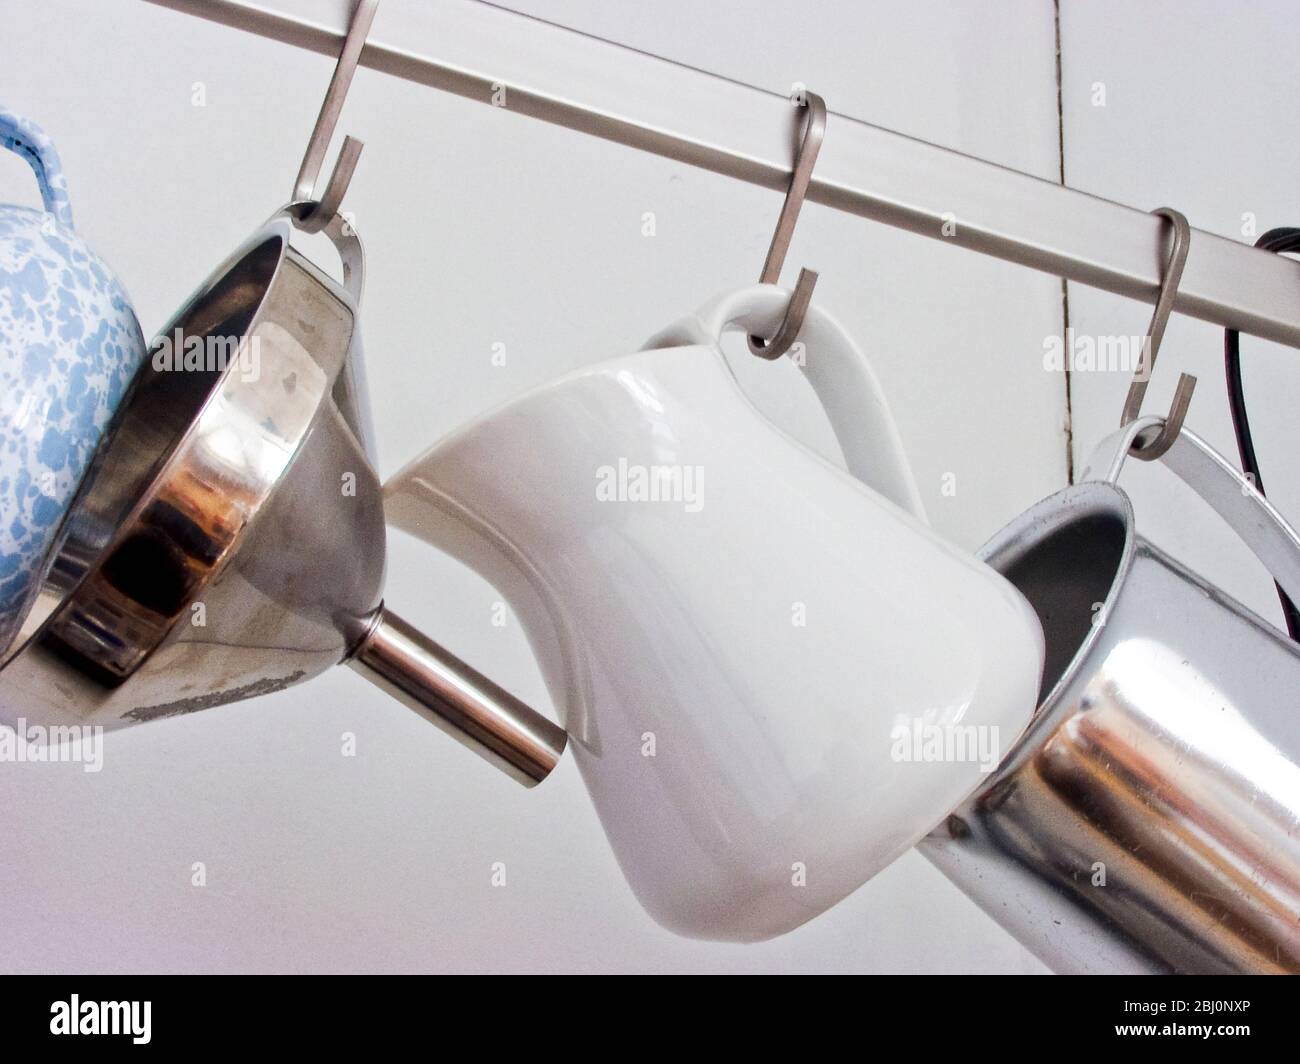 Various kitchen jugs and a funnel hanging on metal rail - Stock Photo